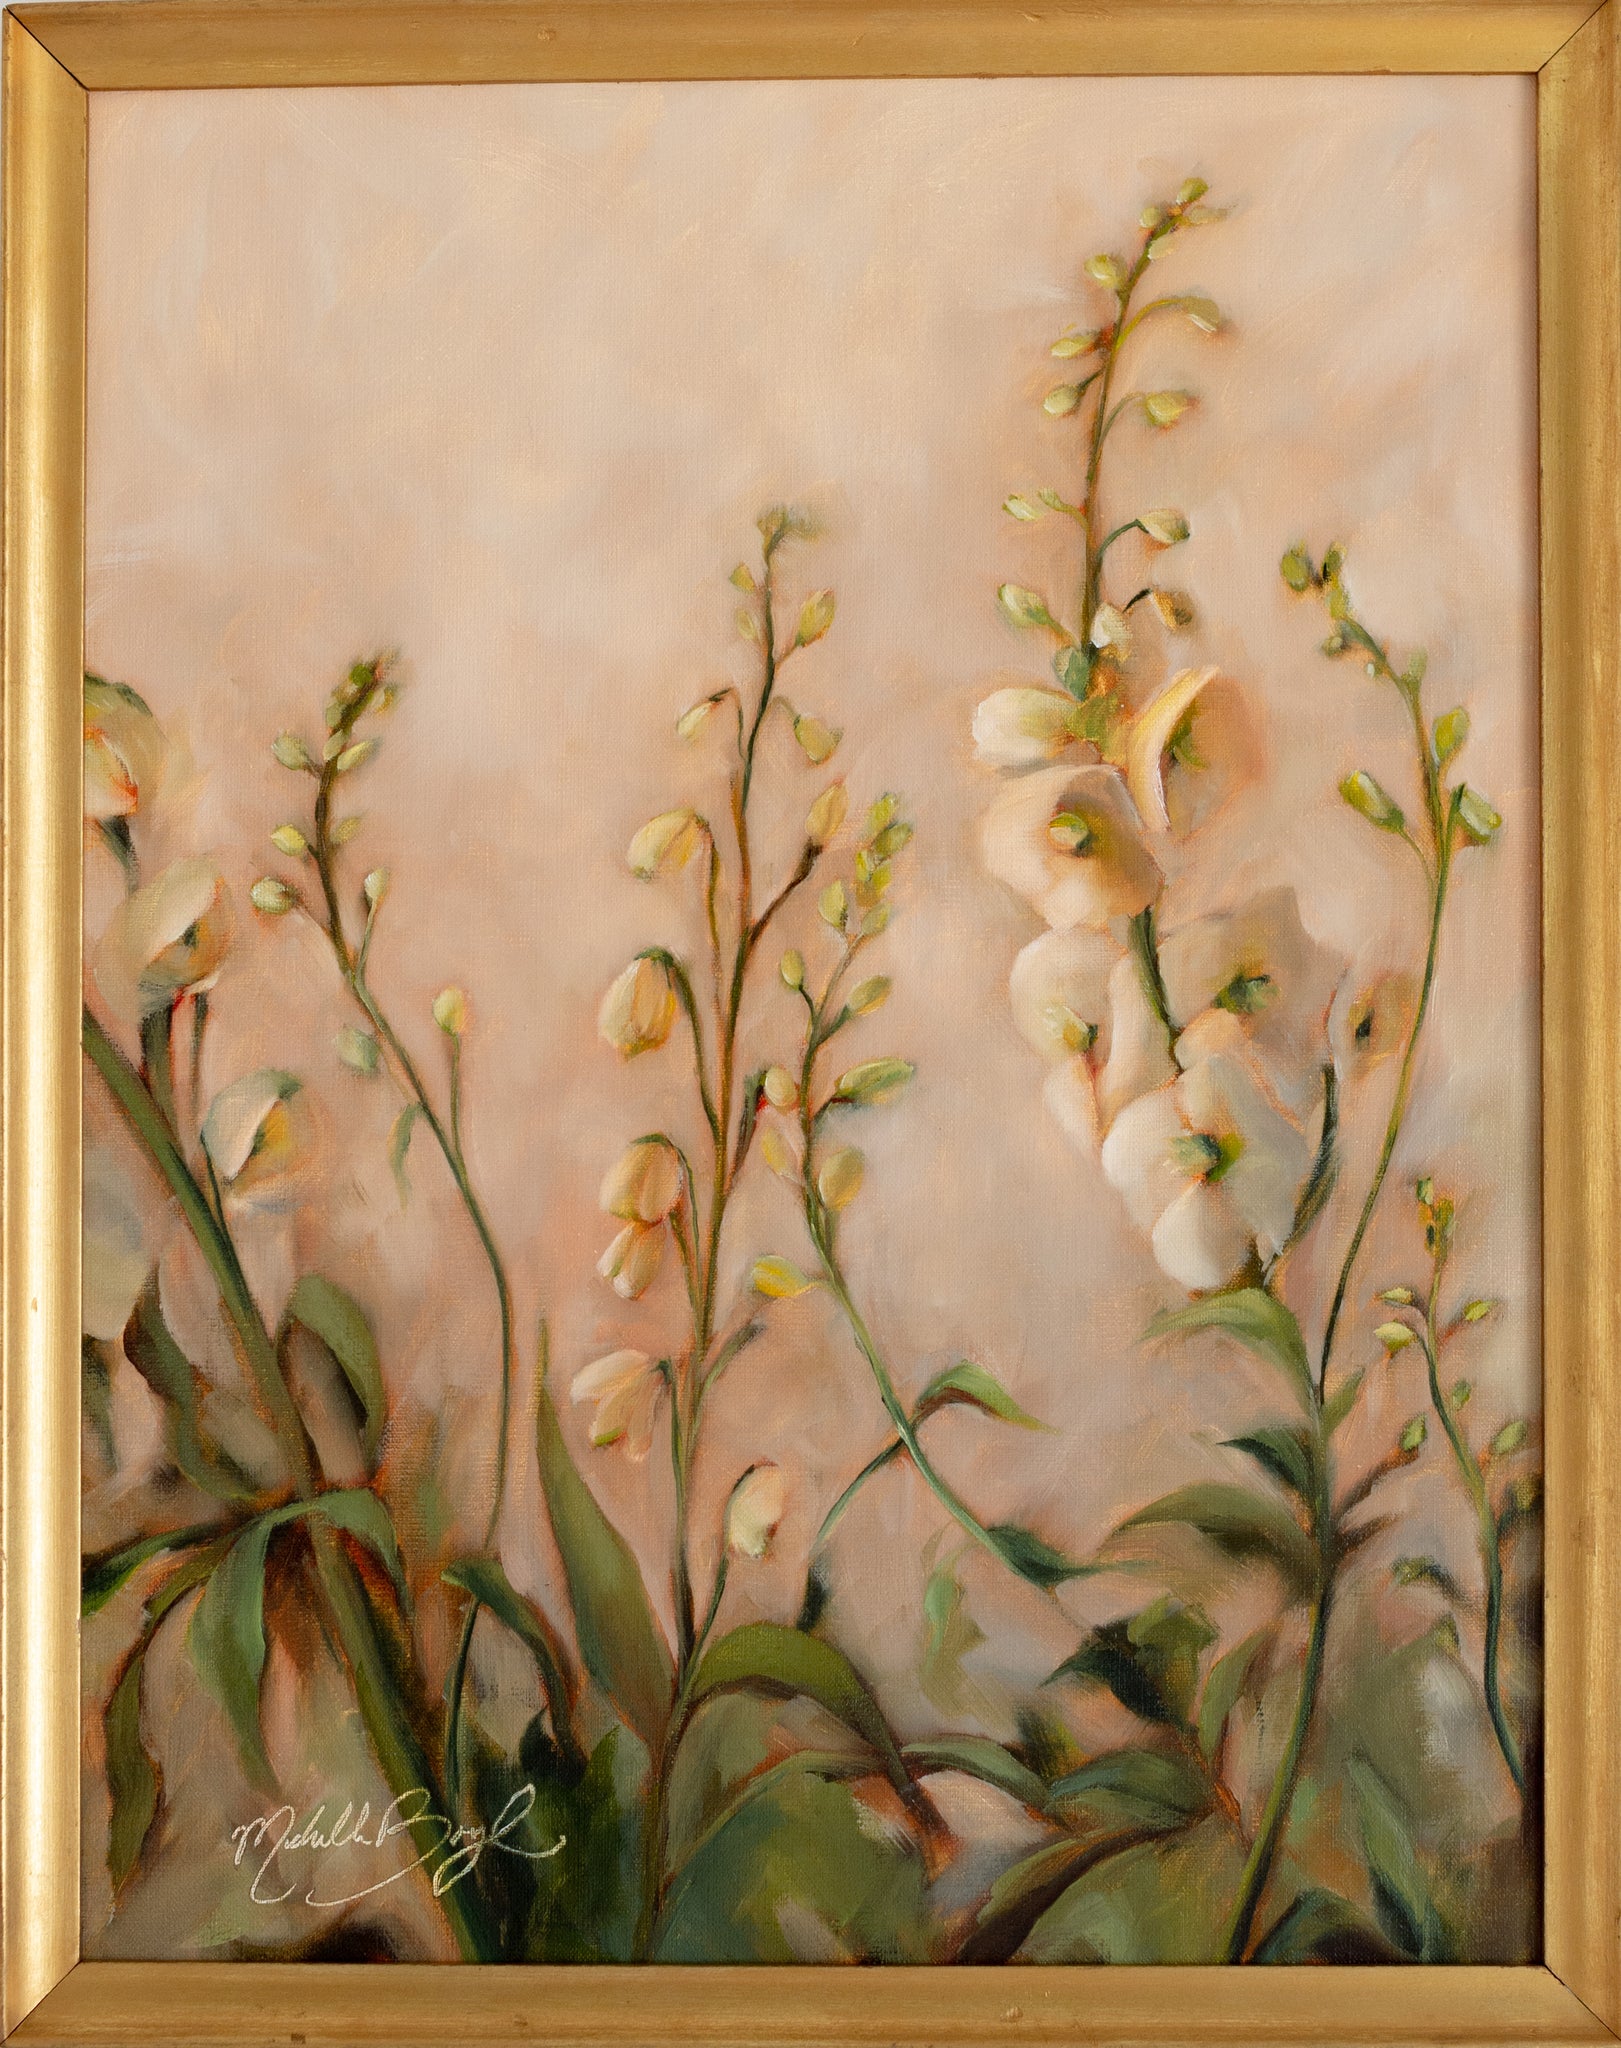 Wait Patiently - 13.75x18" Framed Oil Painting